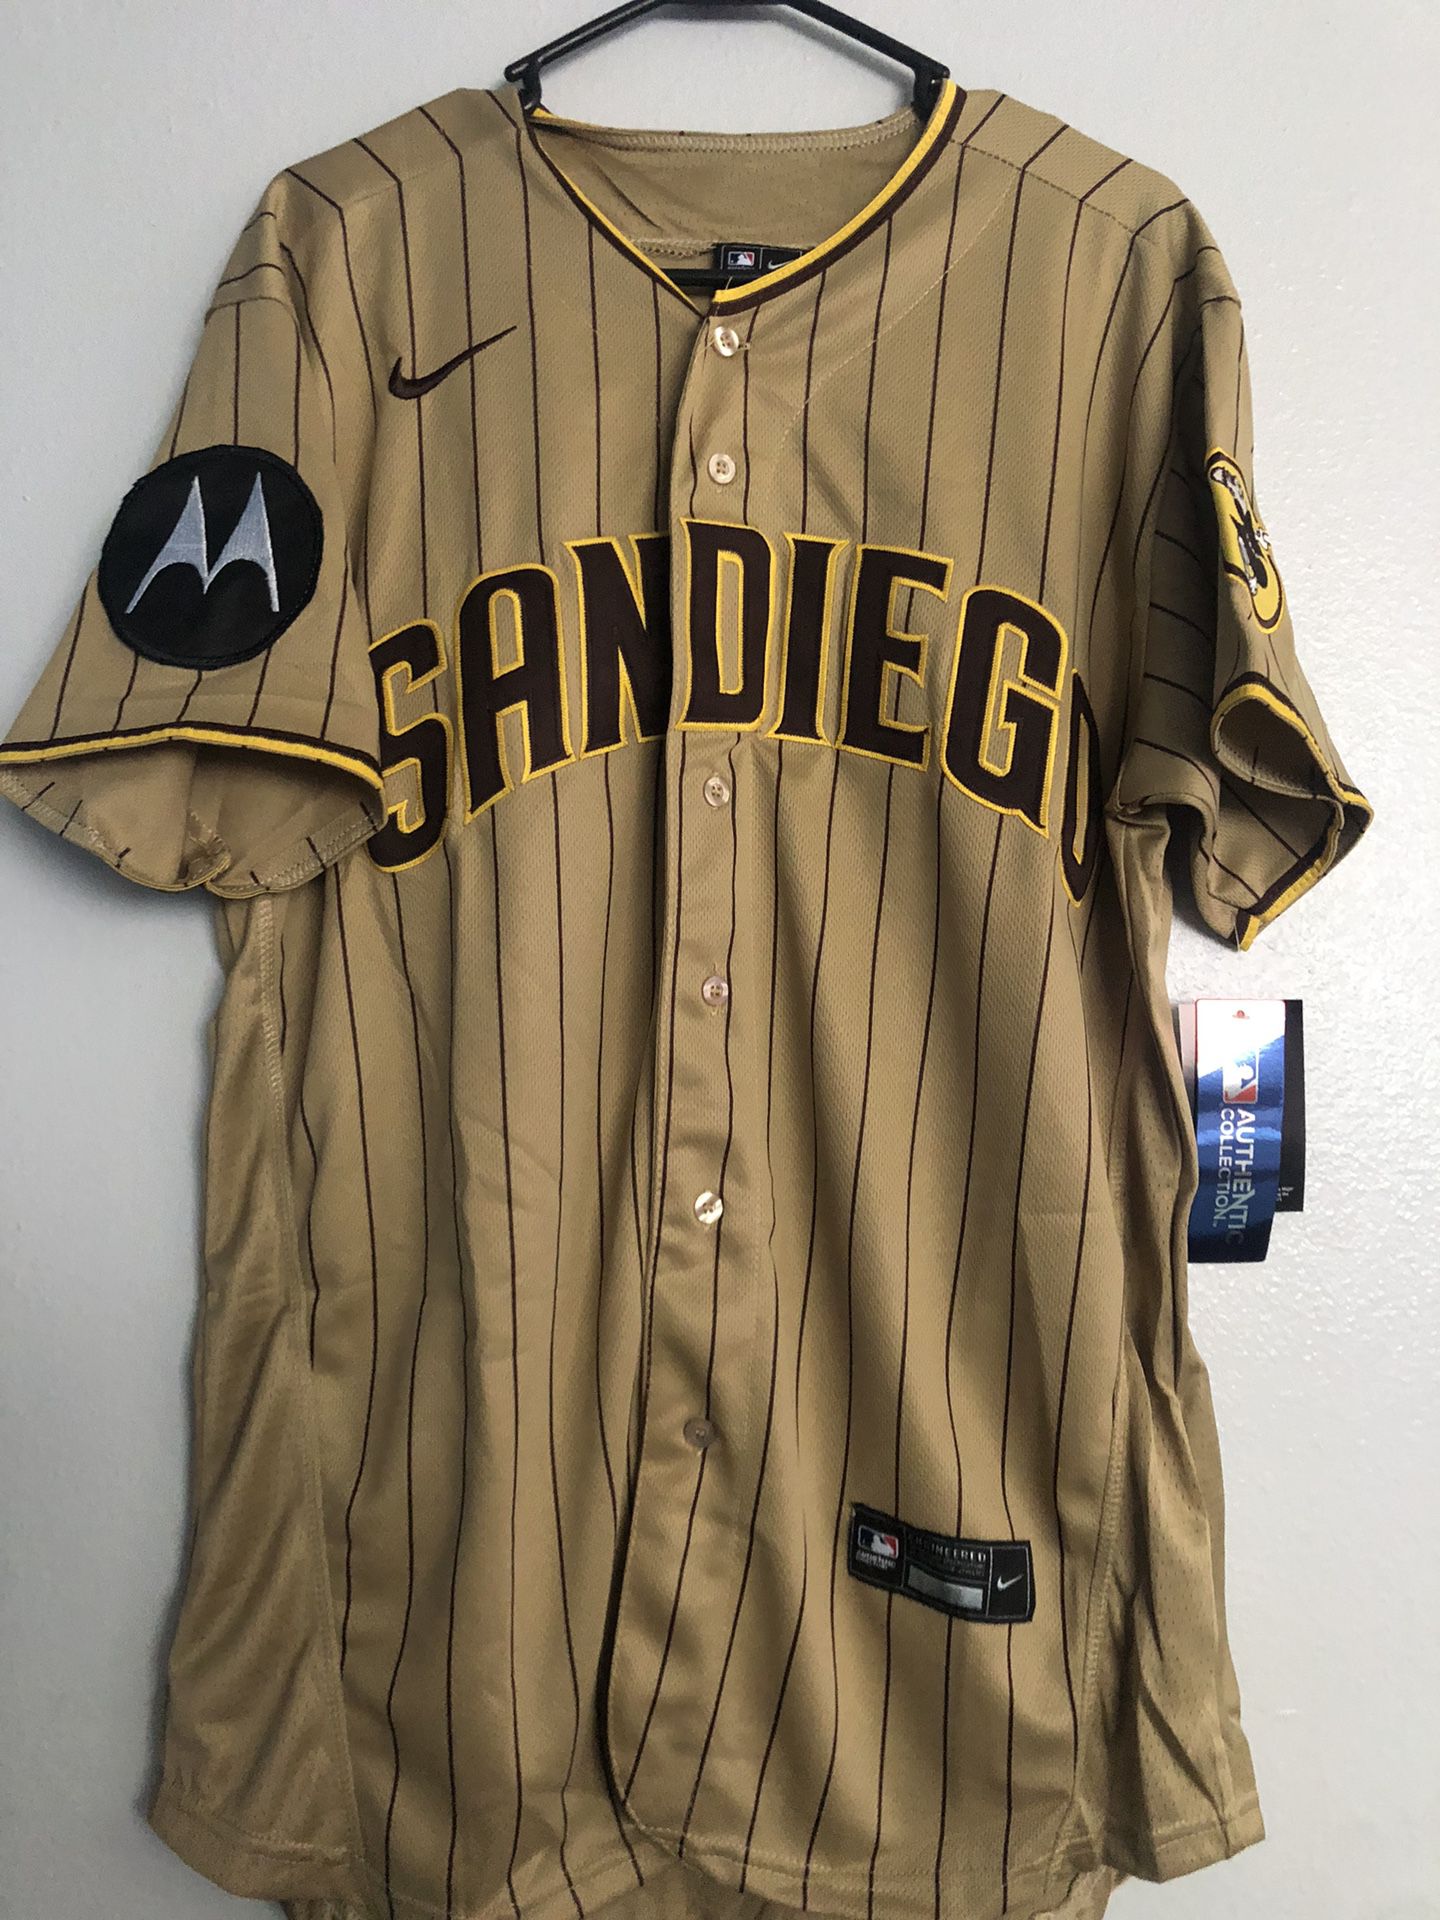 Jake Cronenworth San Diego Padres Jersey-Tan for Sale in Chula Vista, CA -  OfferUp